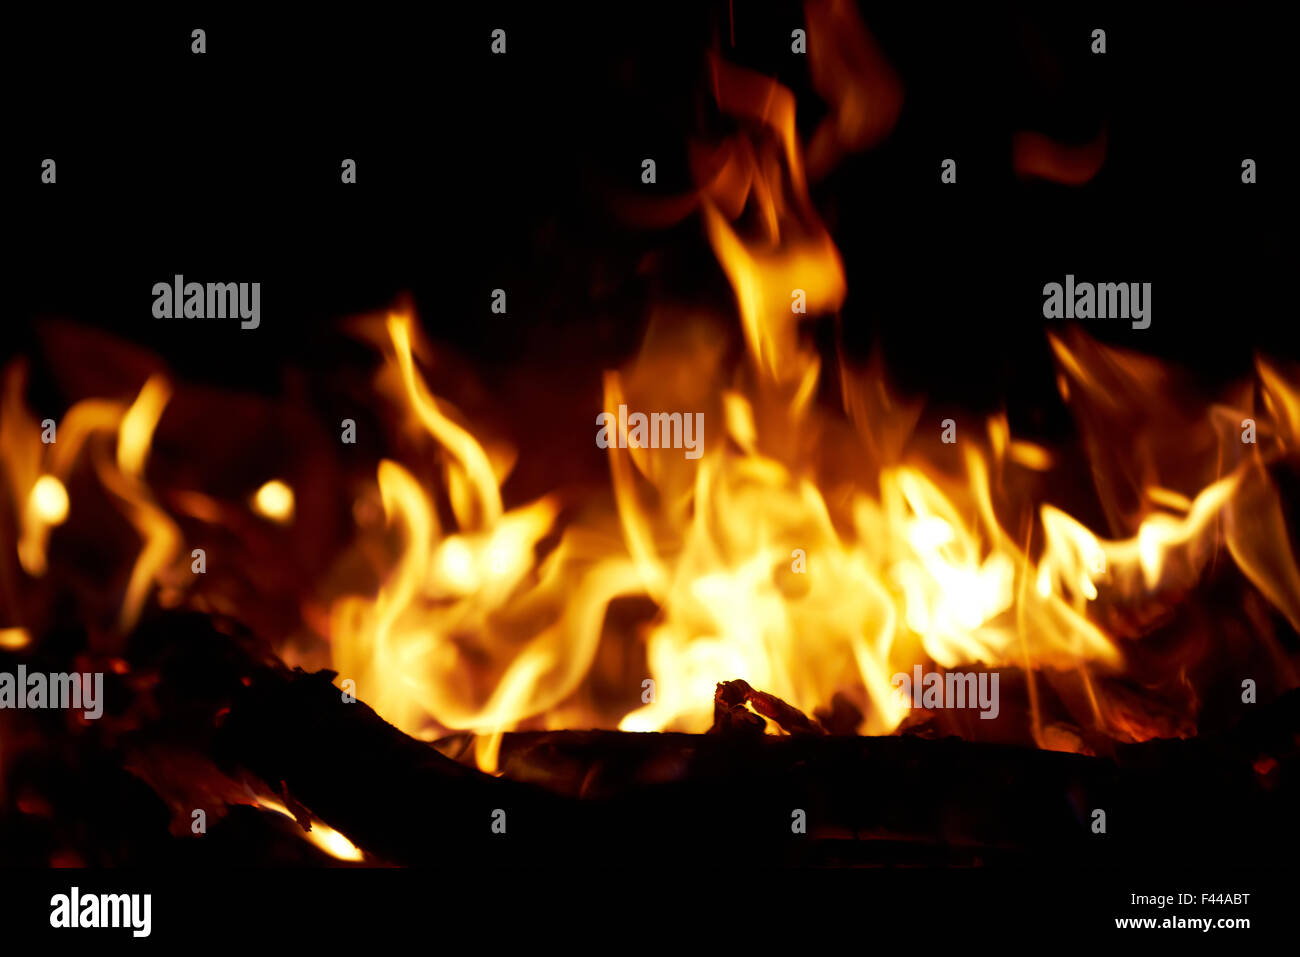 Fire in fireplace. Stock Photo